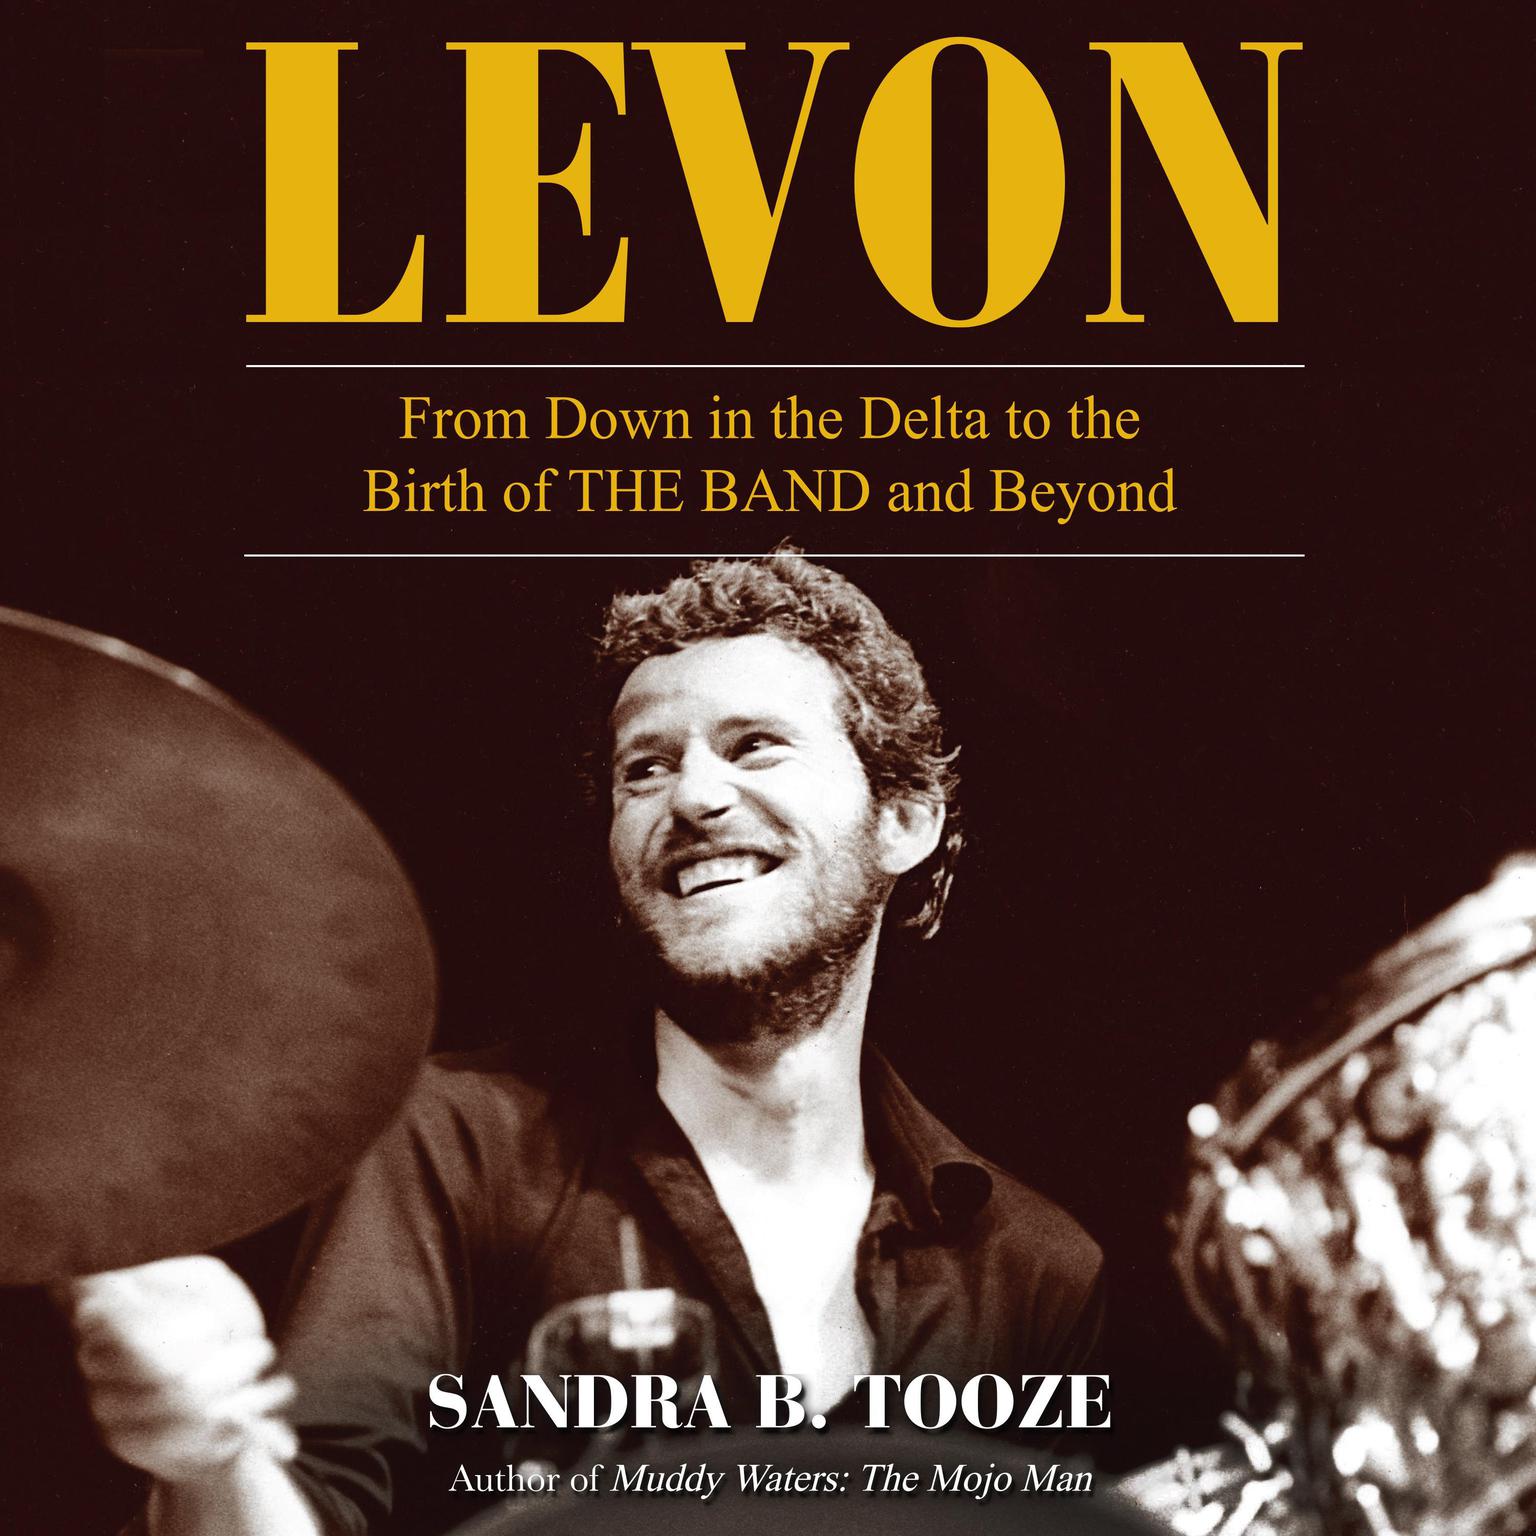 Levon: From Down in the Delta to the Birth of The Band and Beyond Audiobook, by Sandra B. Tooze